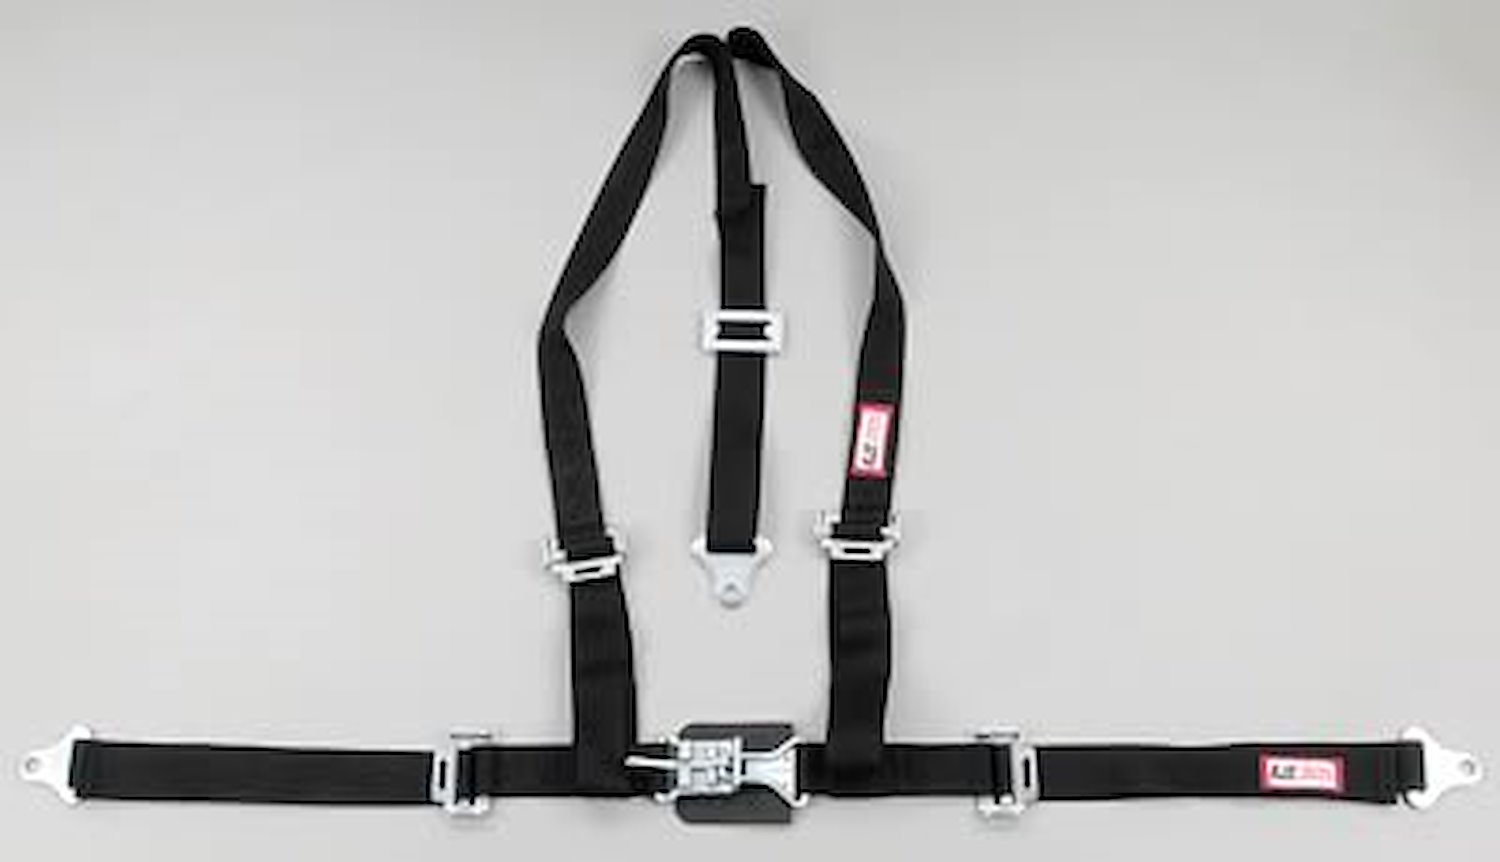 NON-SFI L&L HARNESS 2 PULL UP Lap Belt SNAP SEWN IN 2 S.H. Individual ROLL BAR Mount w/STERNUM STRAP WRAP/BOLT GRAY